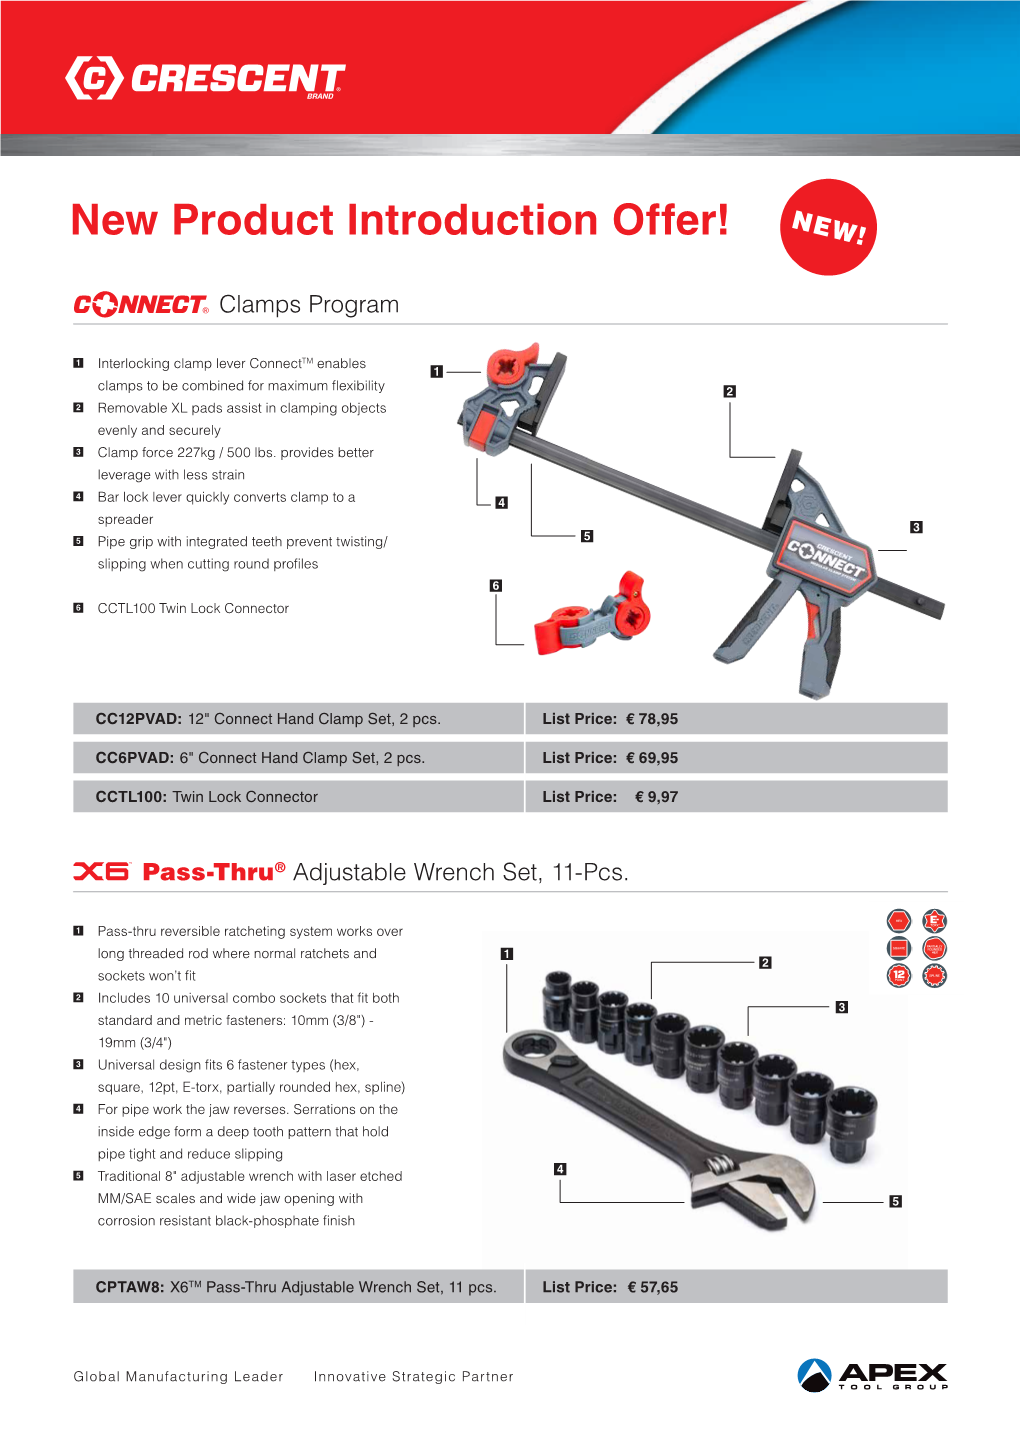 New Product Introduction Offer! NEW!